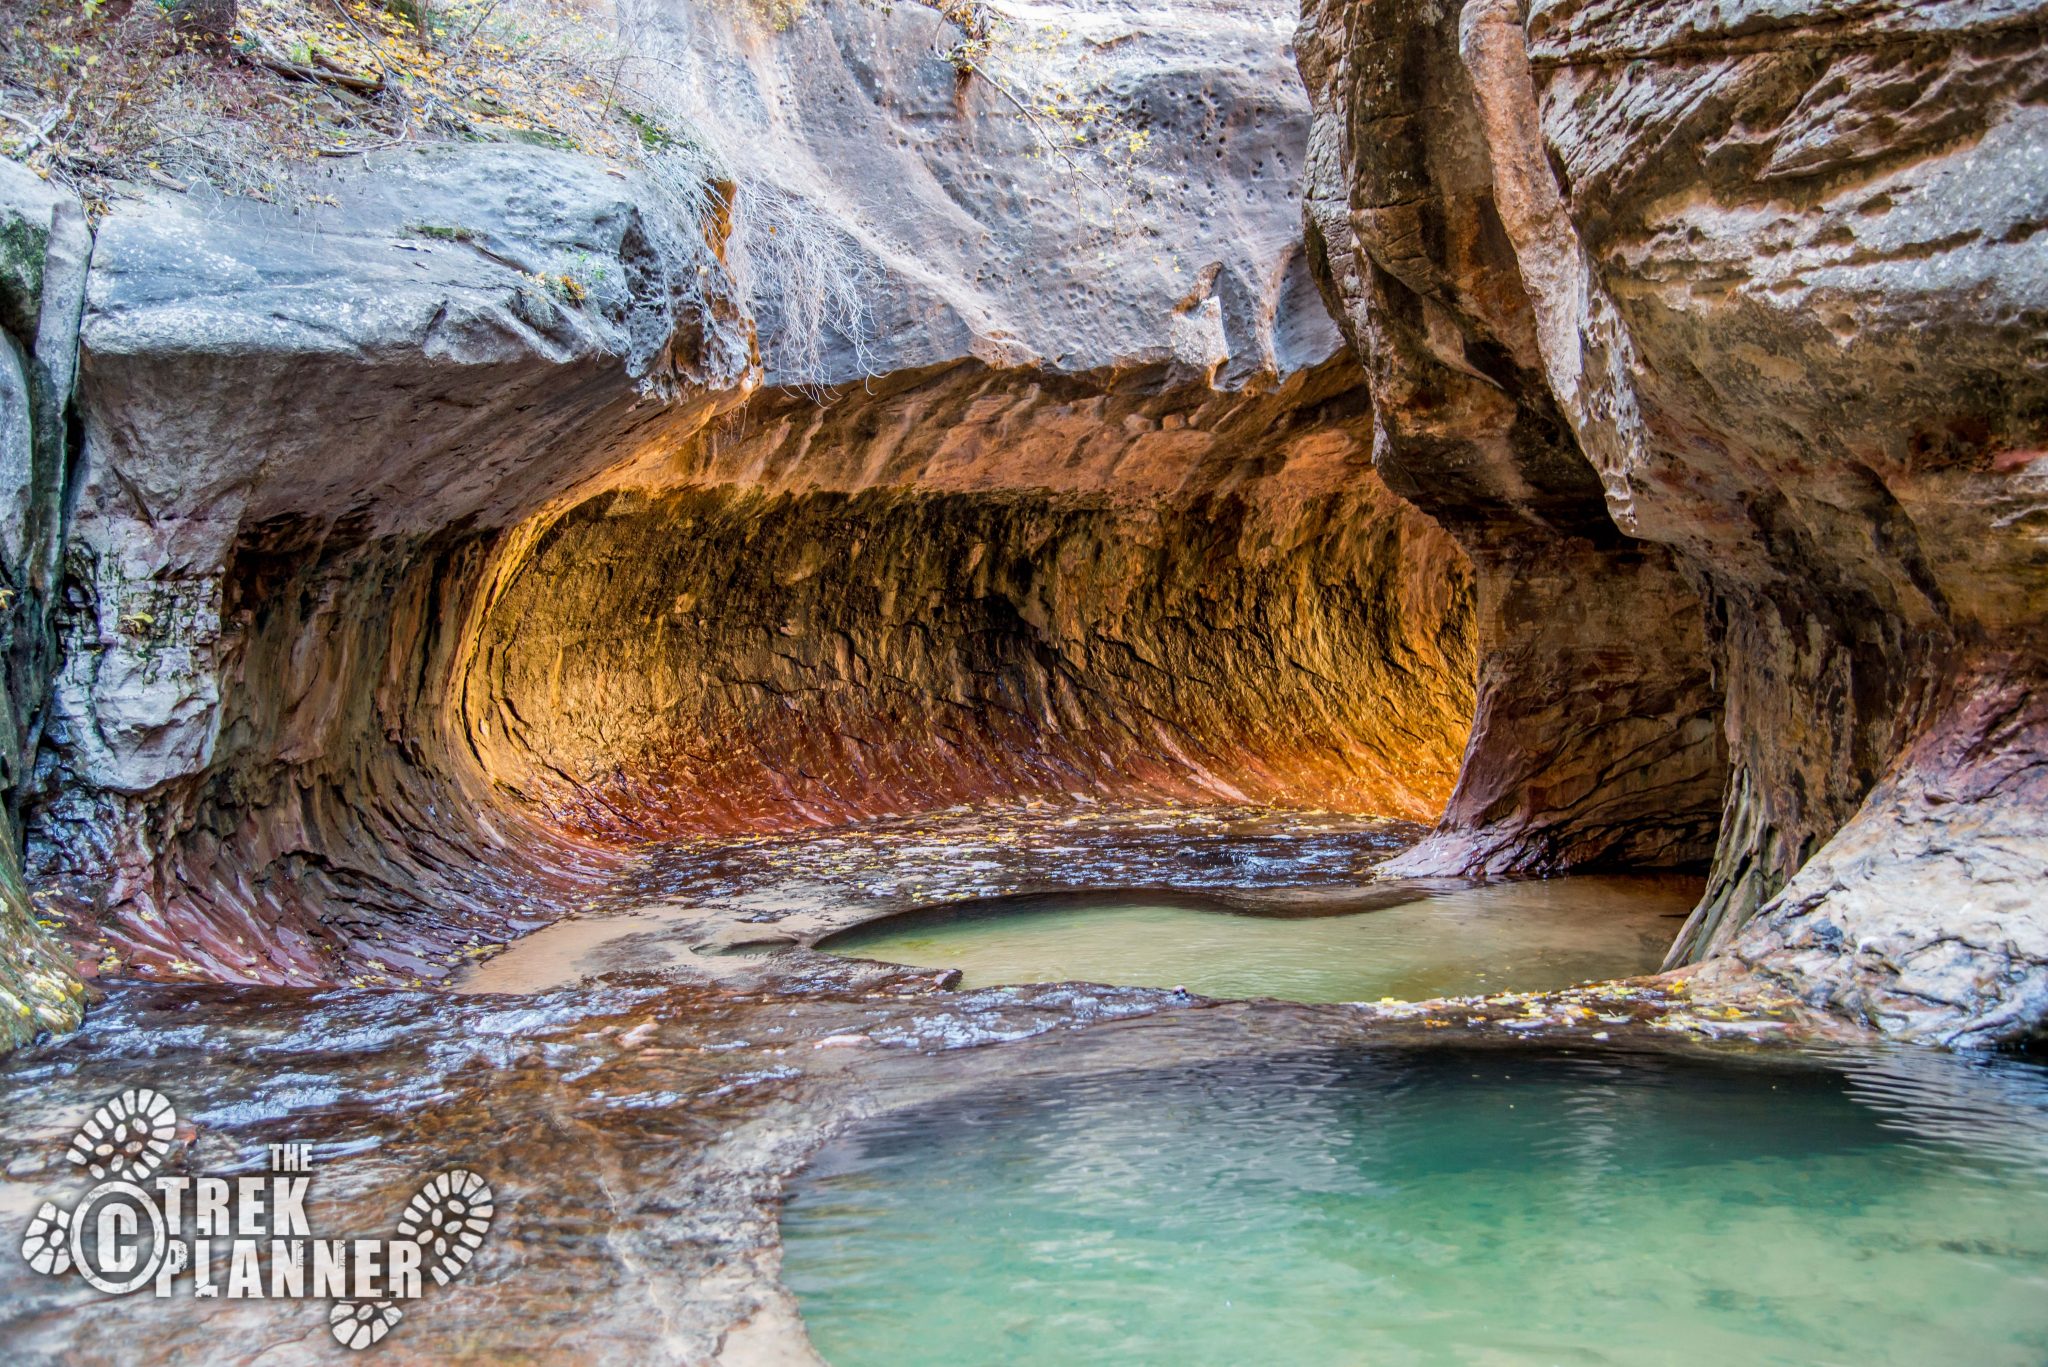 The Subway – Zion National Park